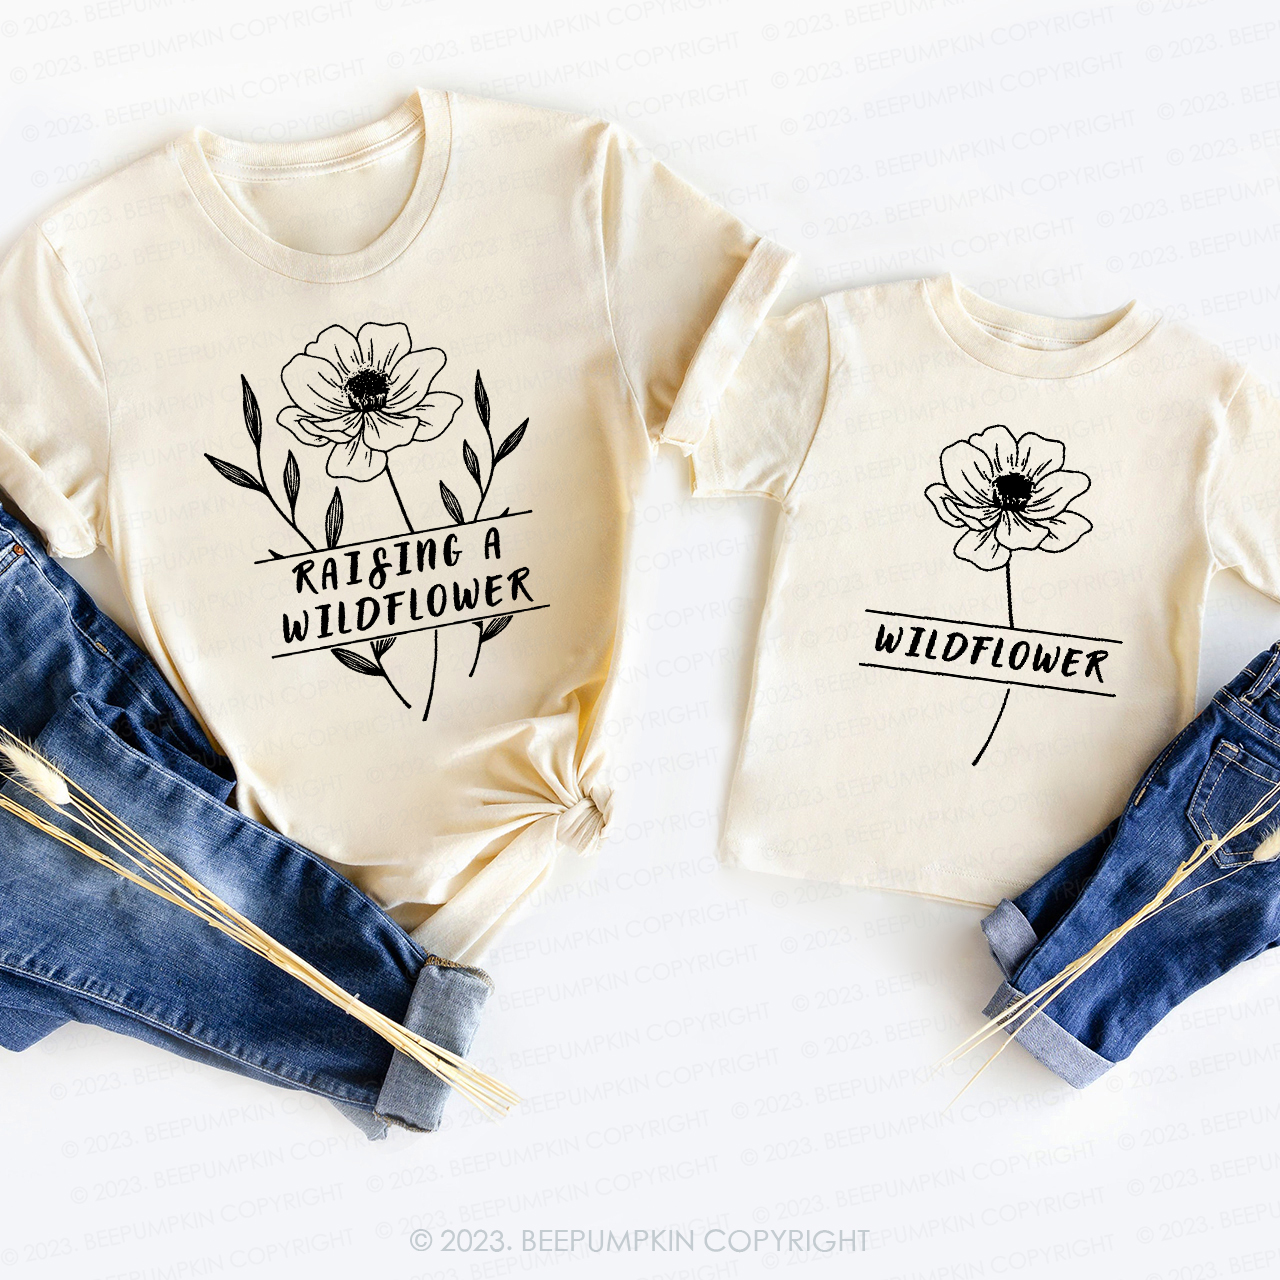 Raising A Wildflower And Wildflower T-Shirts For Mom&Me